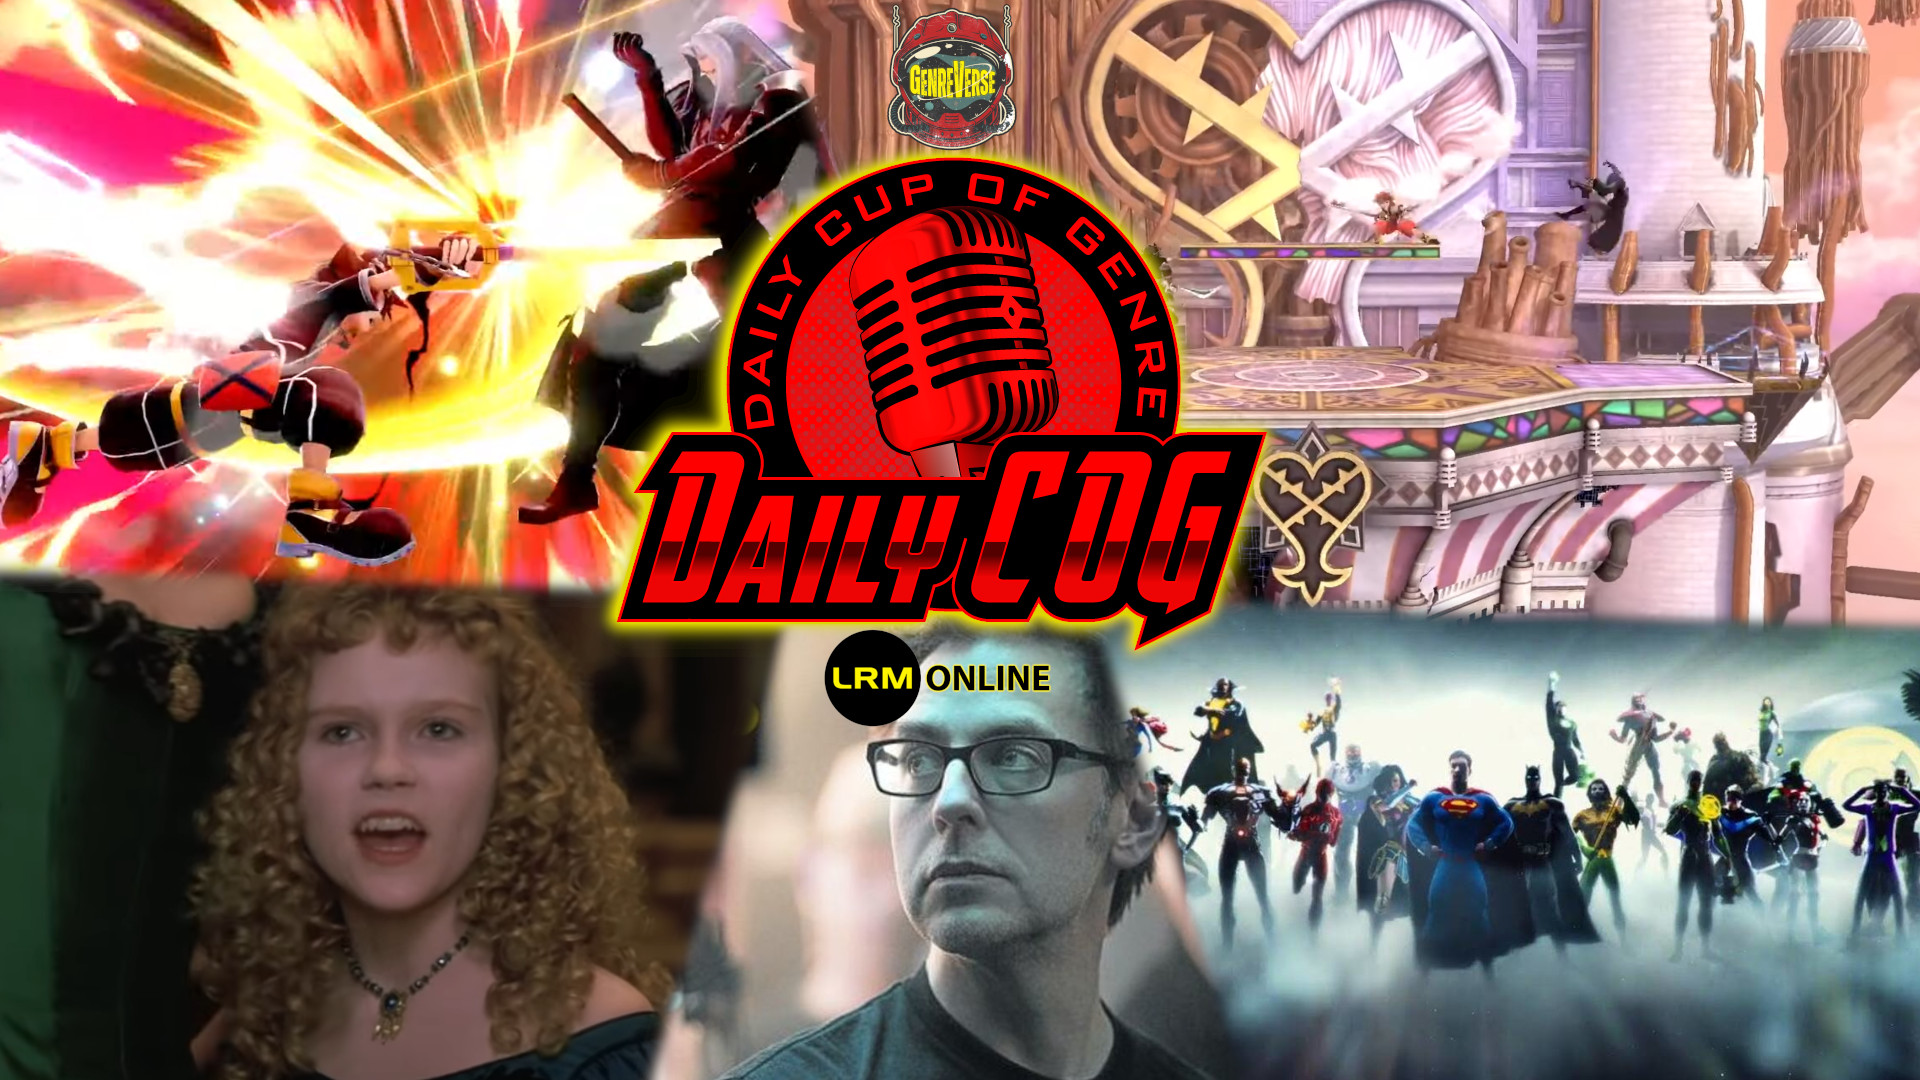 Sora In Super Smash Bros., Interview With A Vampire Cast & Source Material Modifications, And James Gunn Has ANOTHER DC Project In The Works | Daily COG